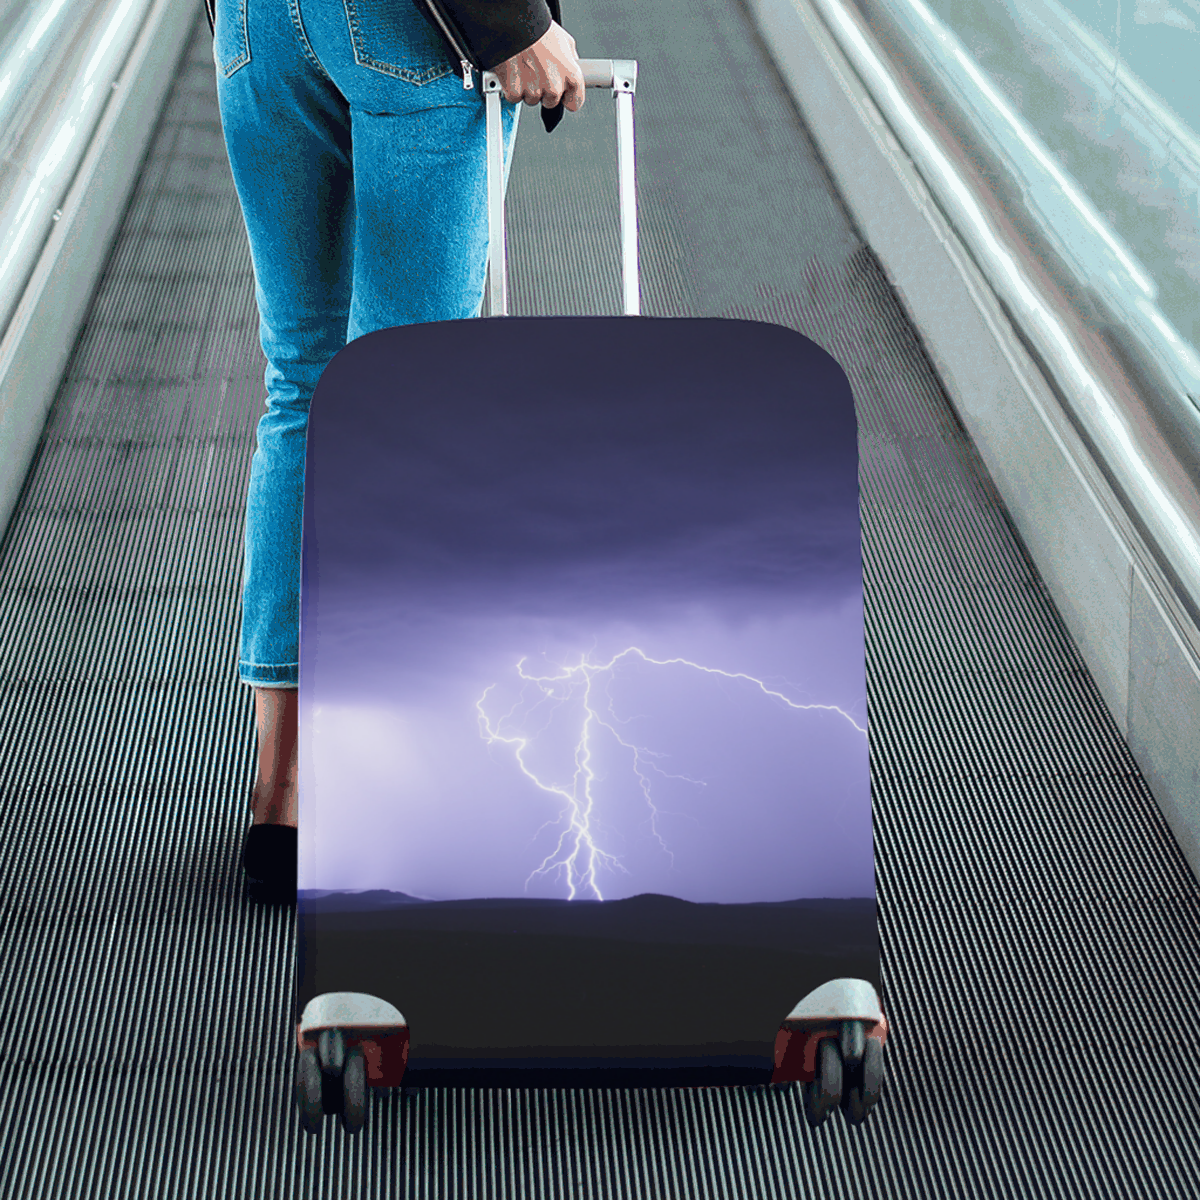 purple wrath Luggage Cover/Large 26"-28"